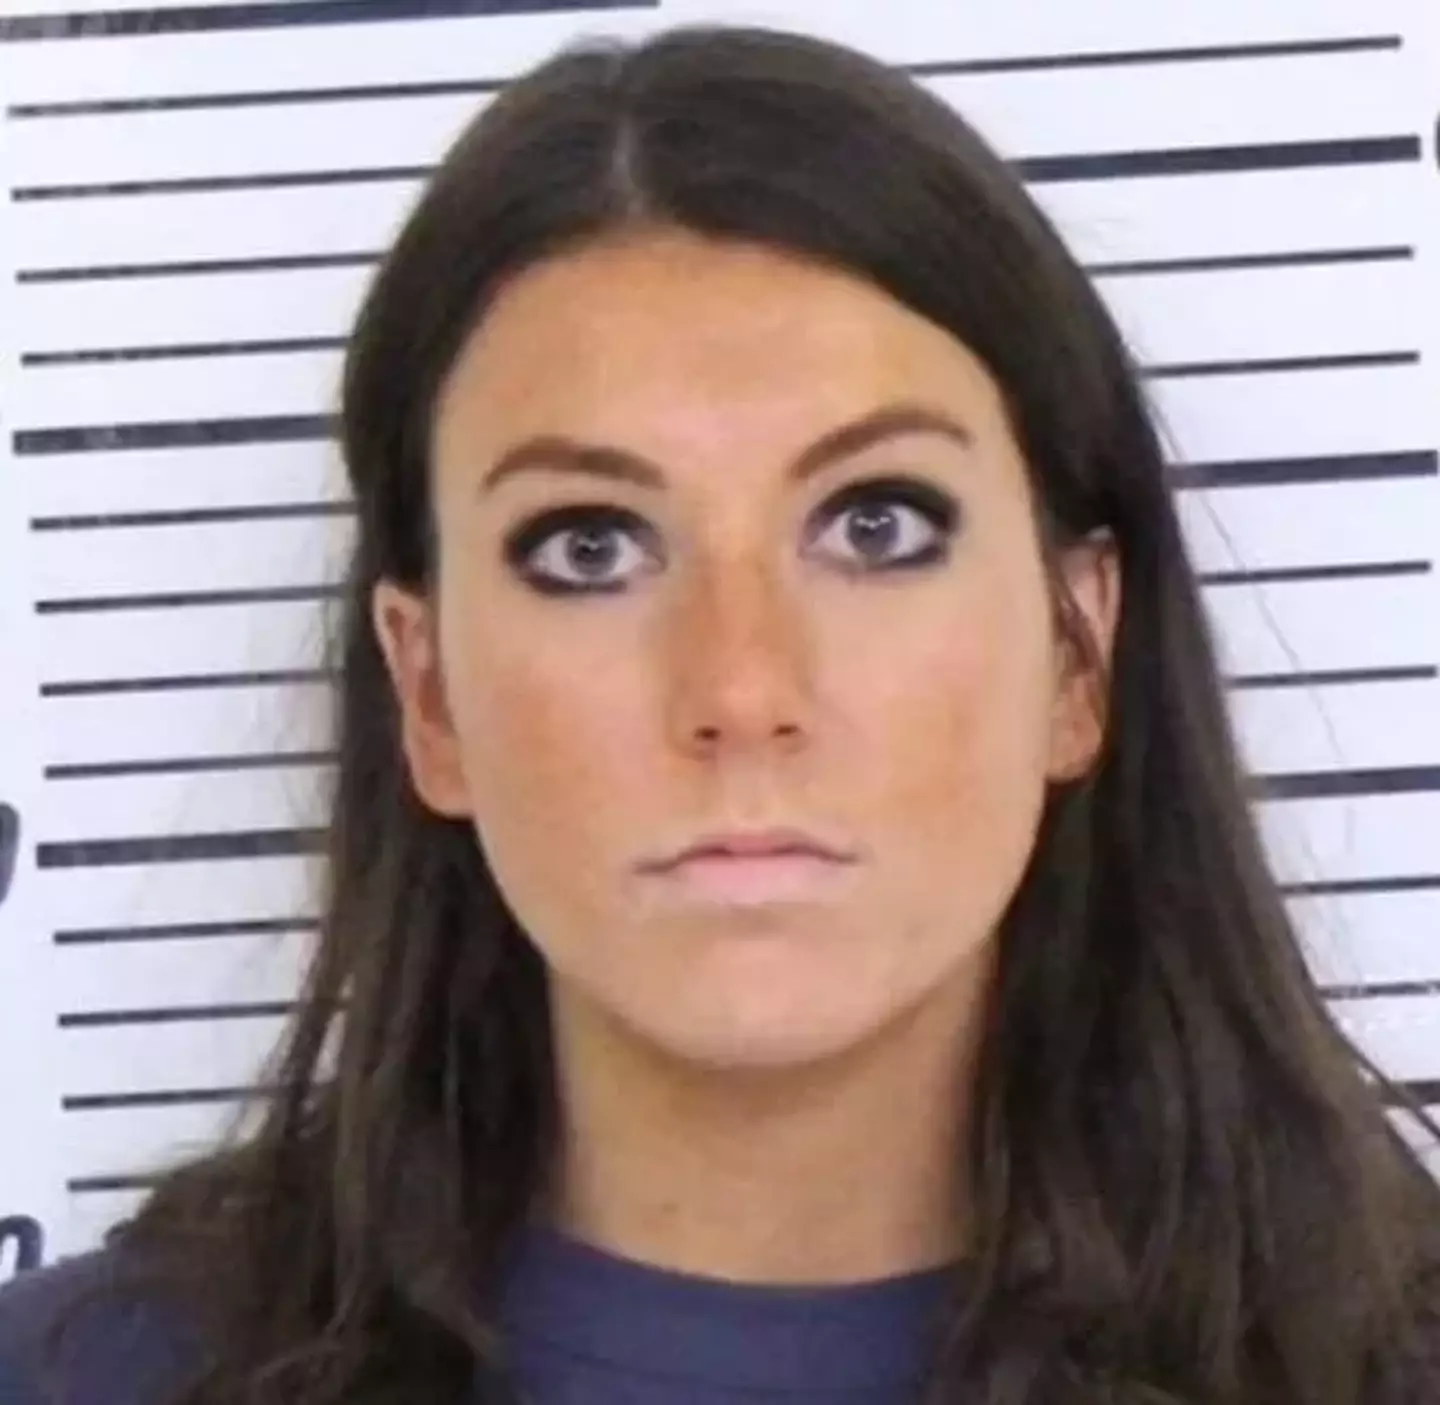 Madison Russo was arrested in January.